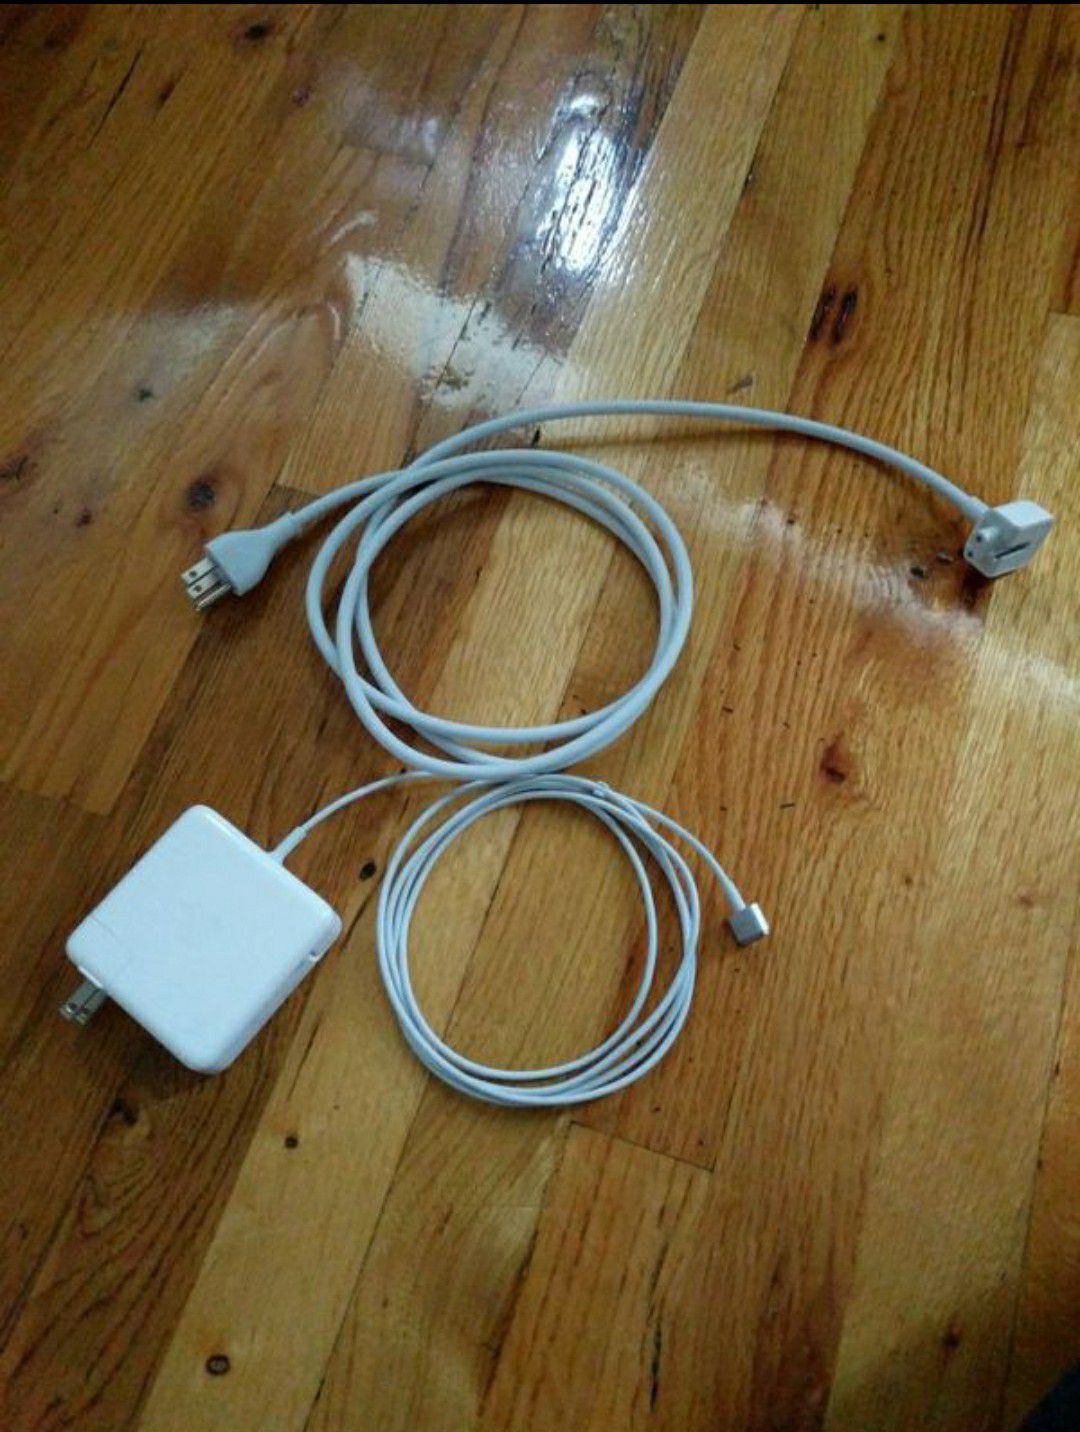 Macbook Pro 85 watt Magsafe 2 Apple charger 85w MS2 Laptop computer cord power adapter cable Air A1424 for 11" 13" & 15" 15 inch Widescreen display